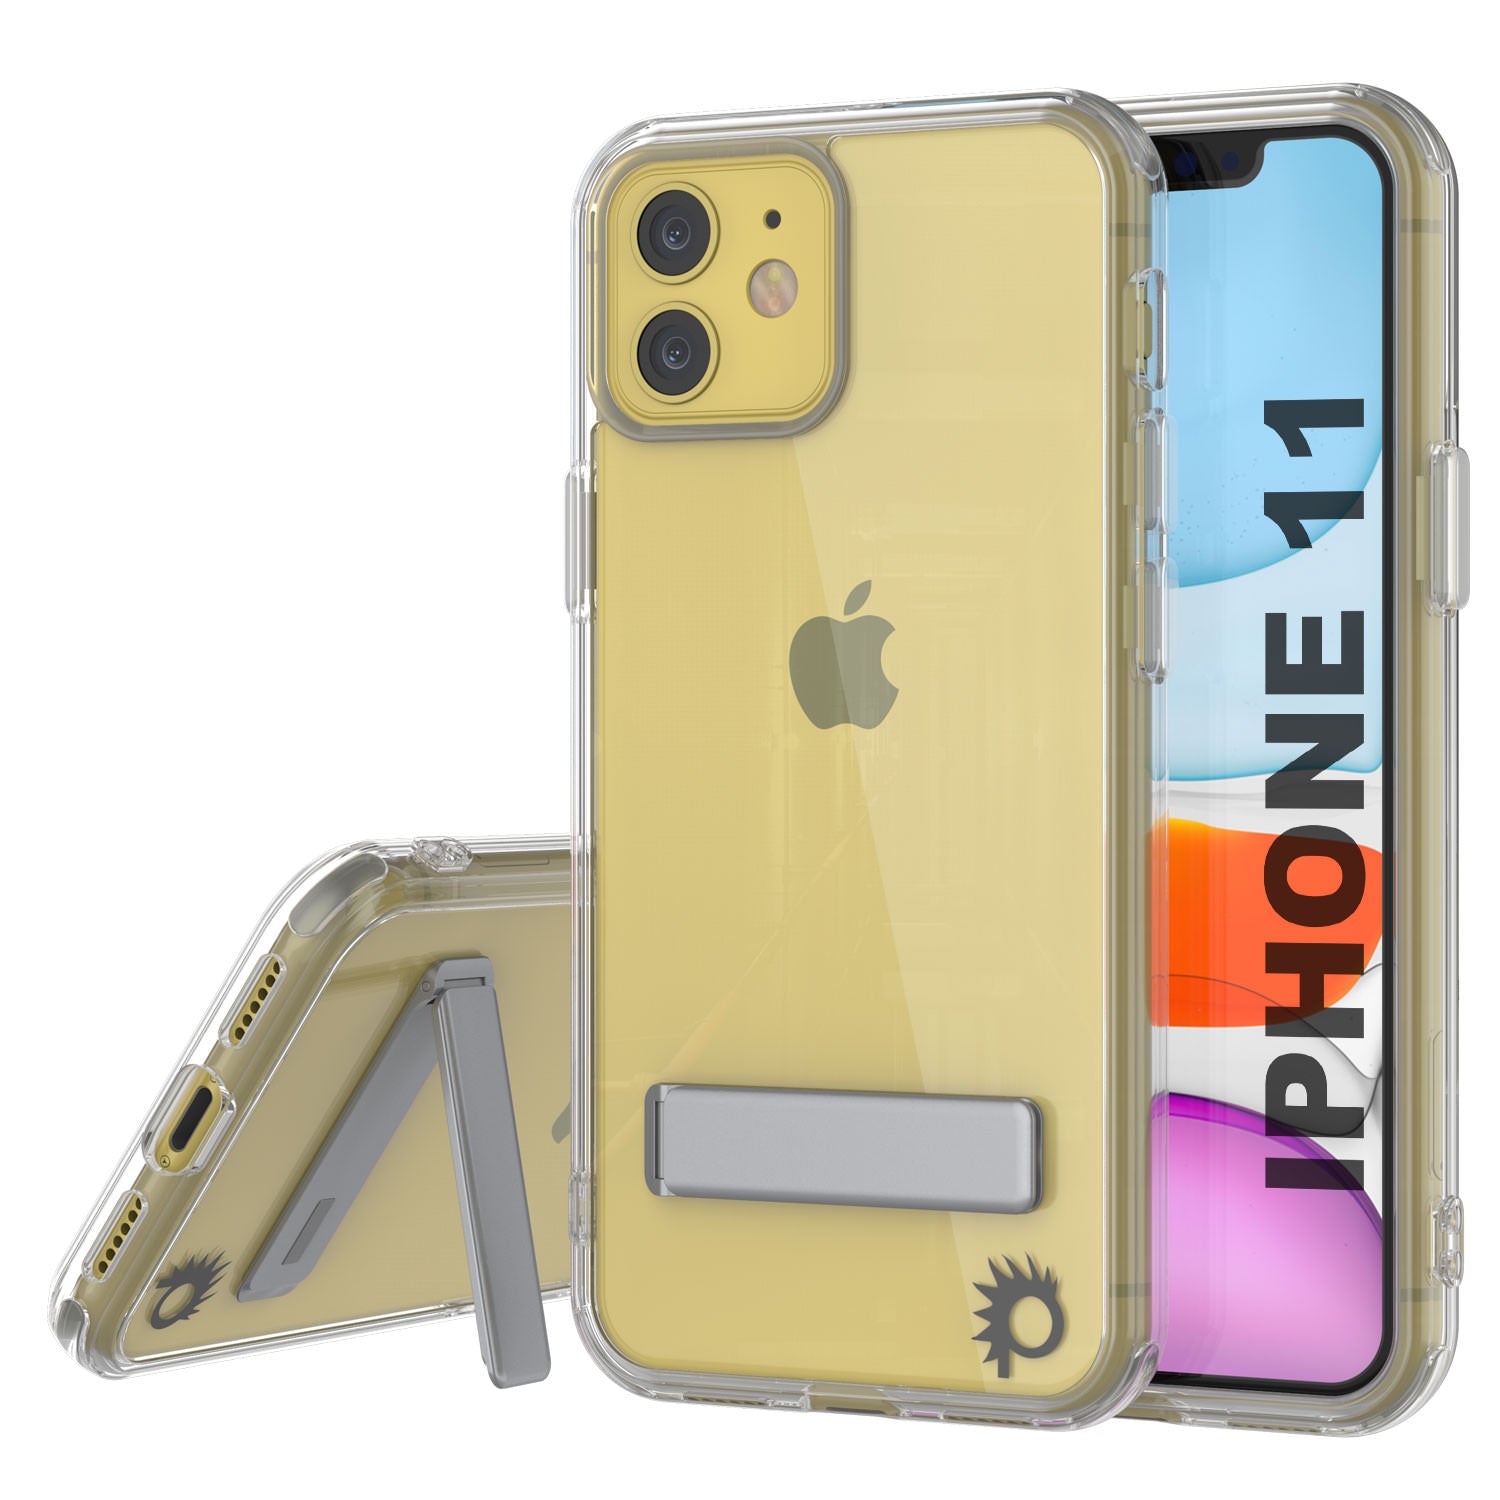 iPhone 11 Case Thin Fit